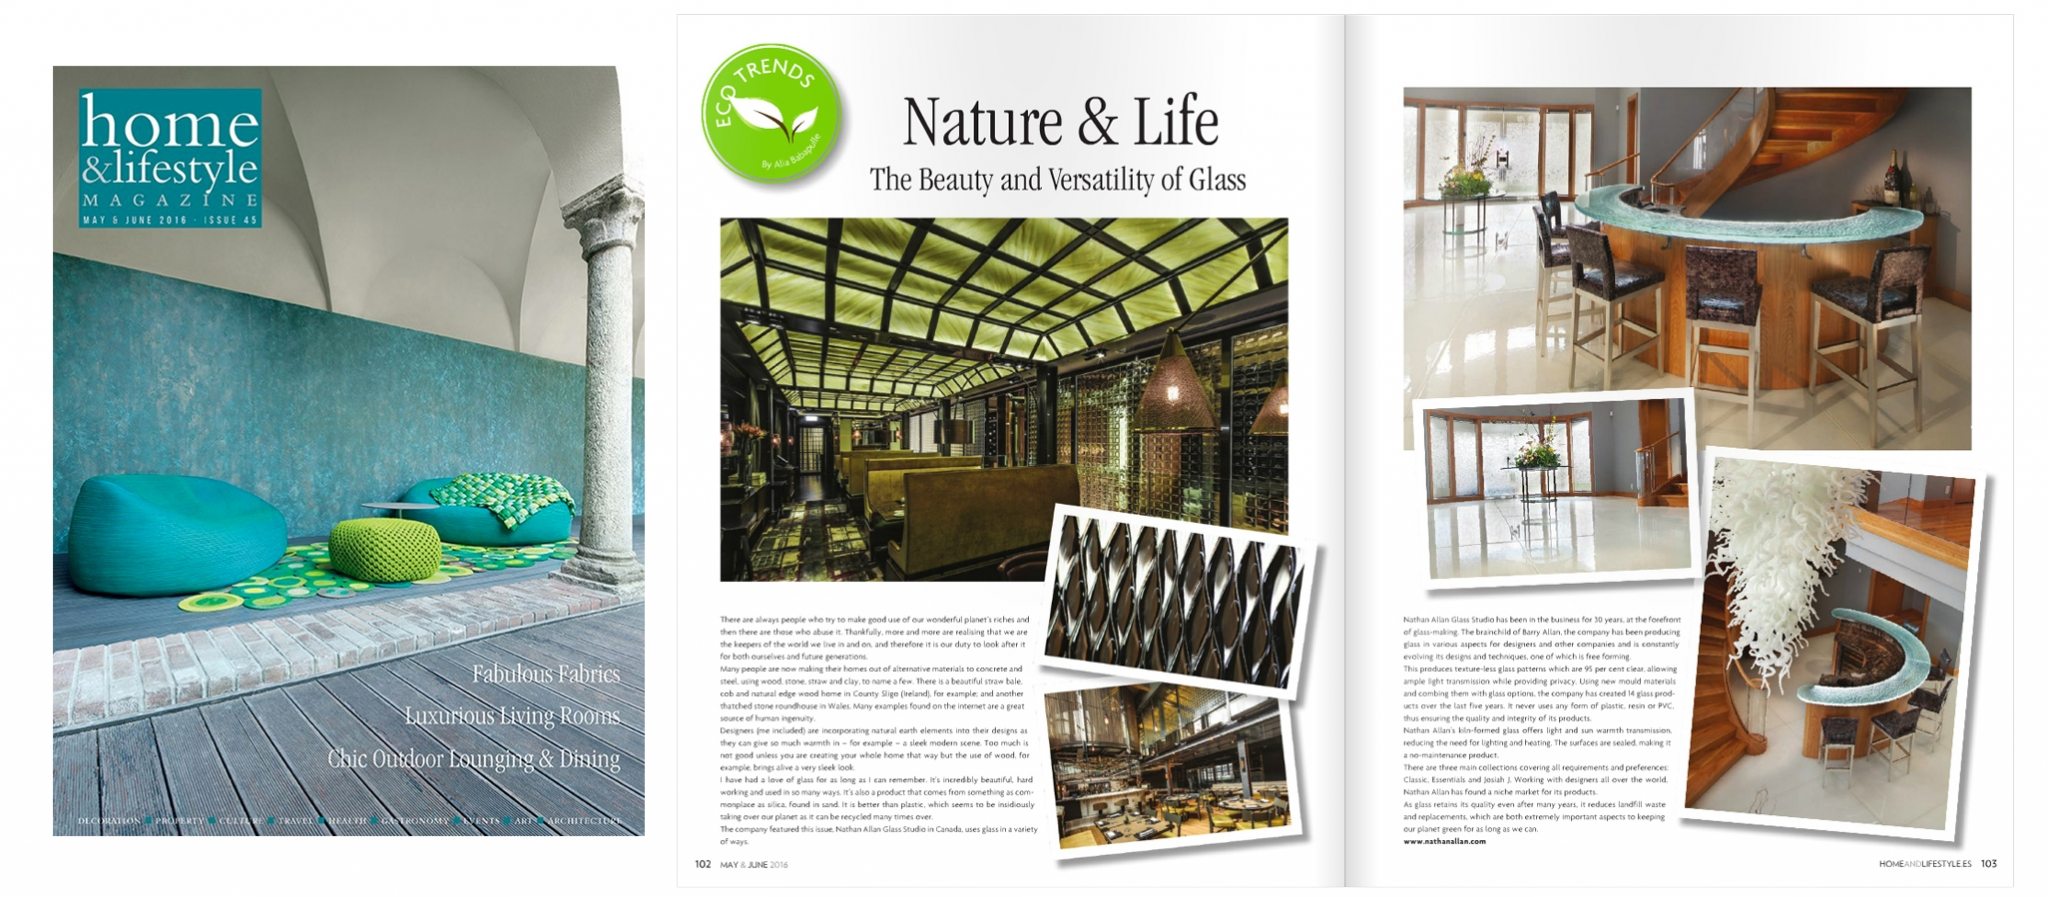 Home and Lifestyle Magazine Nathan Allan Decorative Glass